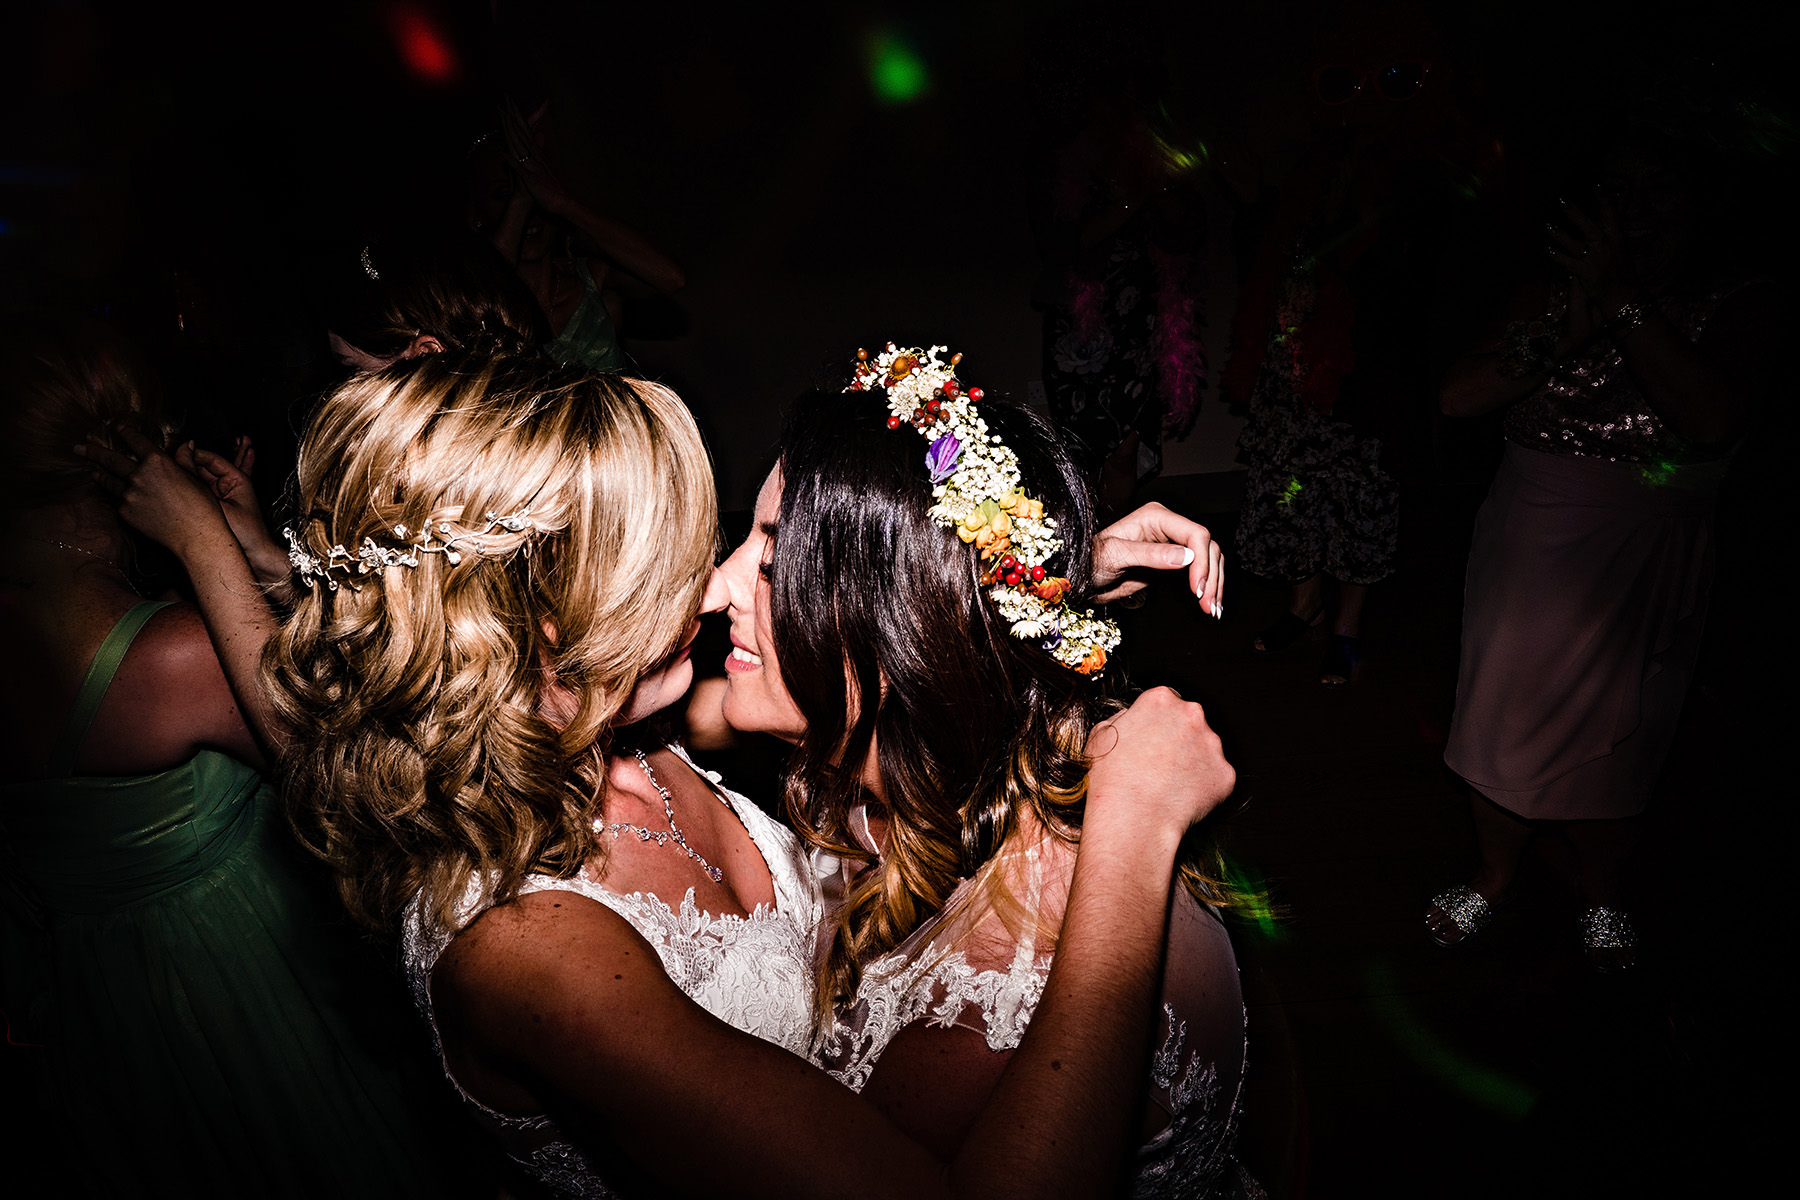 The brides in a loving embrace at a same sex wedding